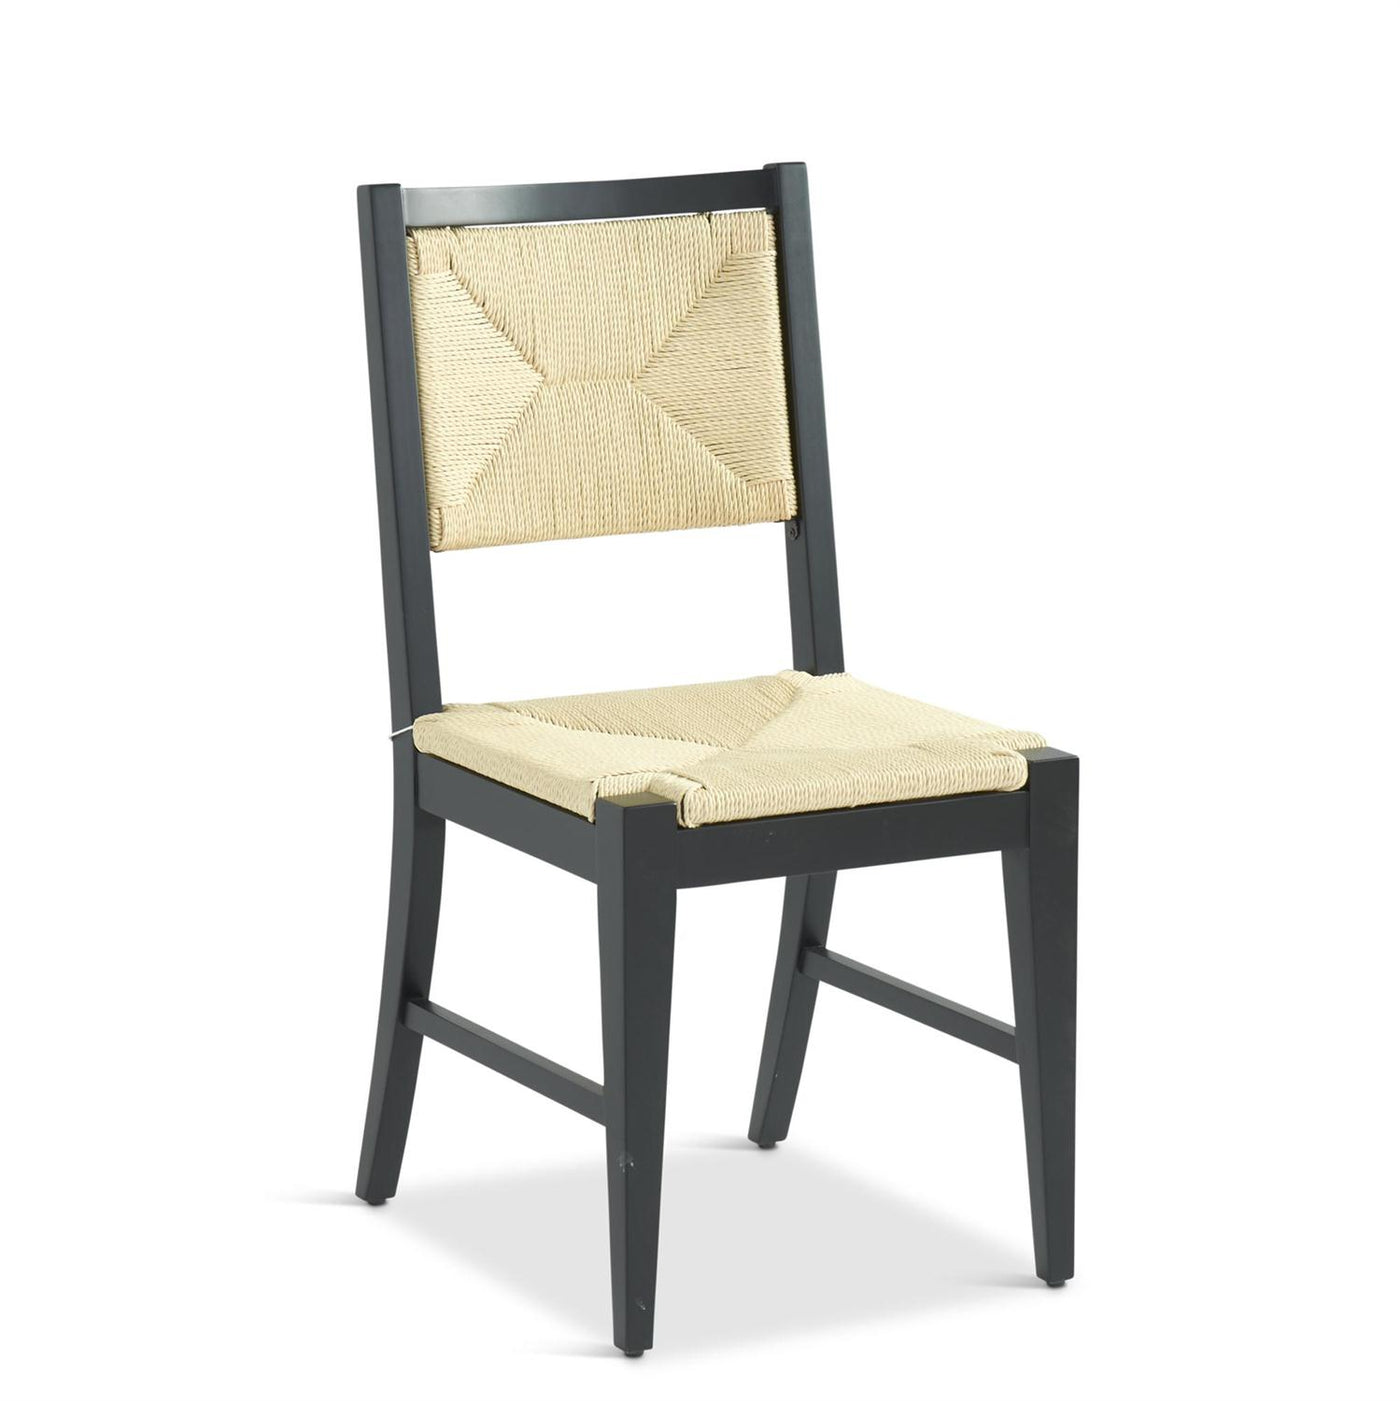 Black Birch & Woven Rope Dining Chair